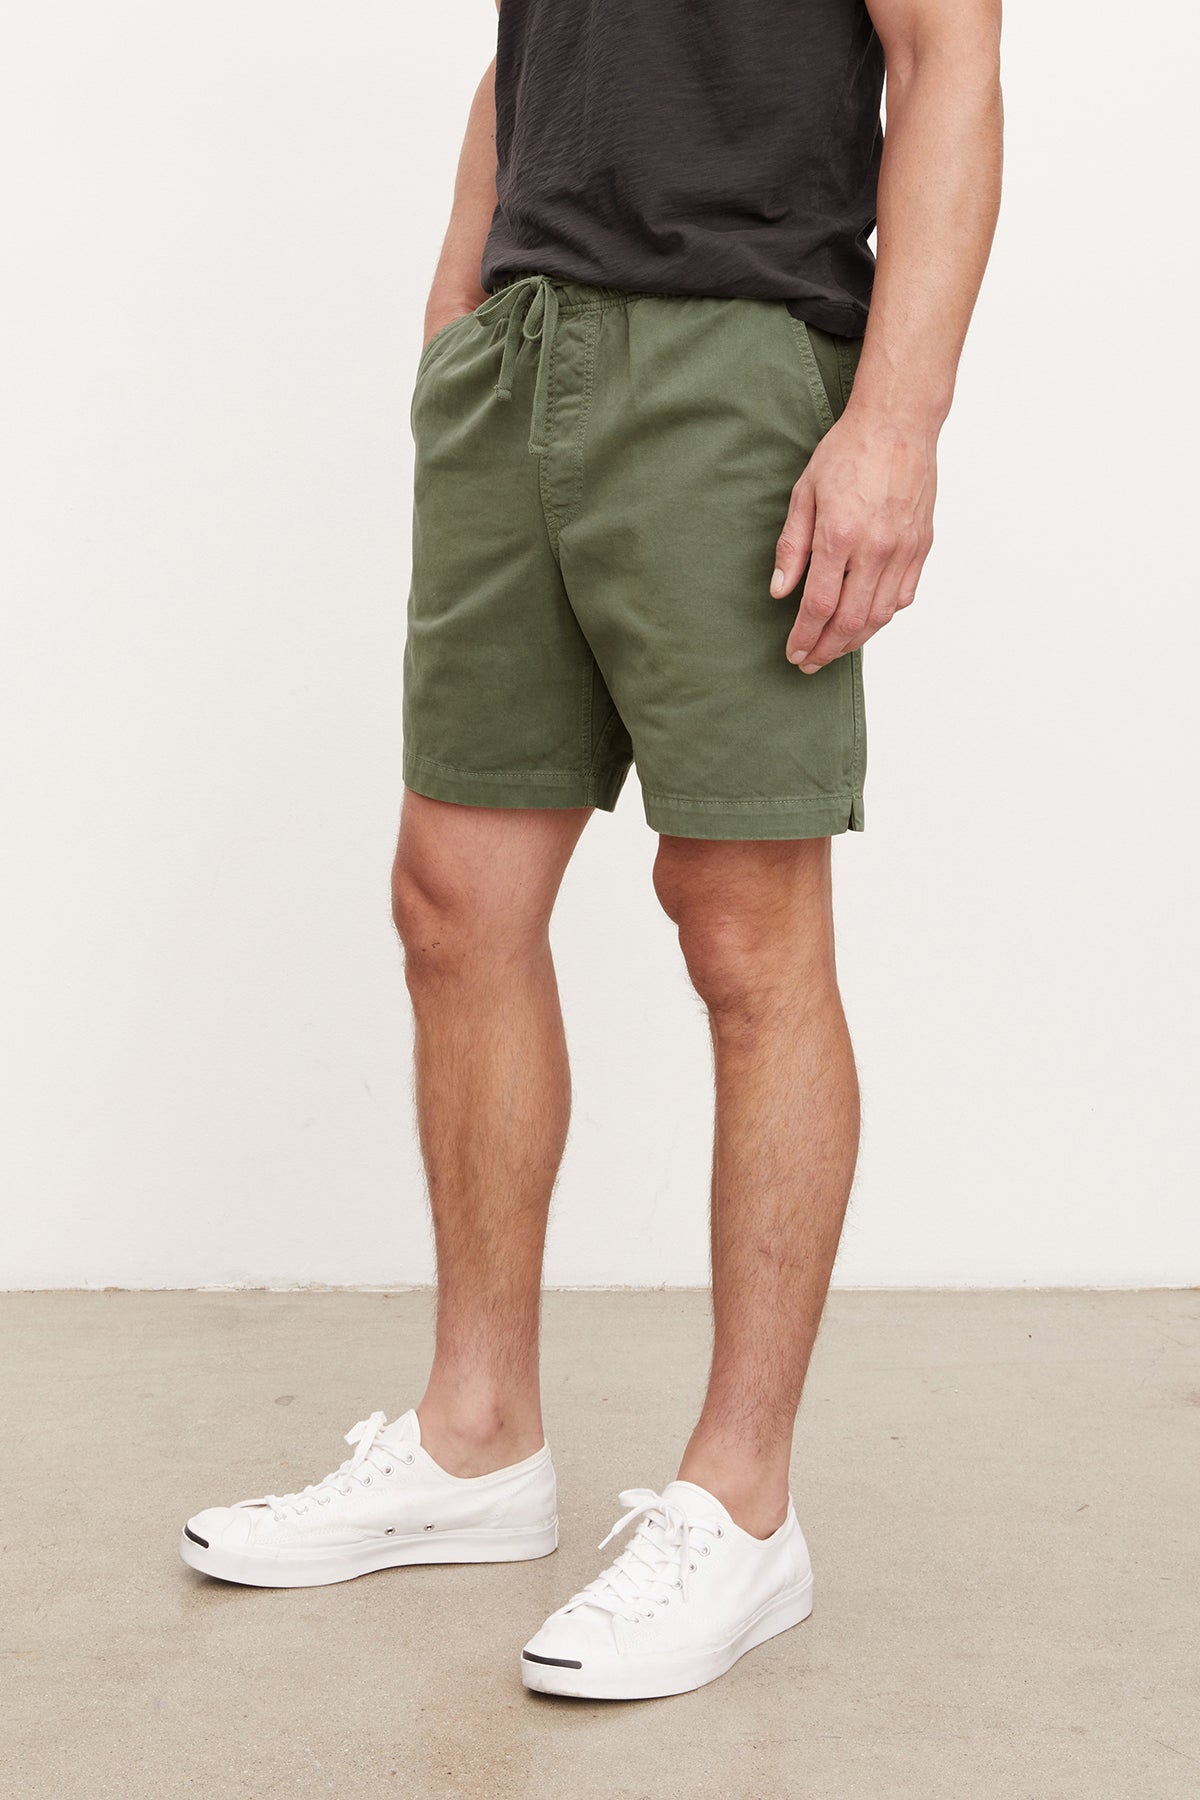 Man standing in a neutral pose wearing Velvet by Graham & Spencer's FIELDER SHORT, an olive green cotton twill shorts with an elastic drawstring waist, a black t-shirt, and white sneakers against a plain background.-36805393744065